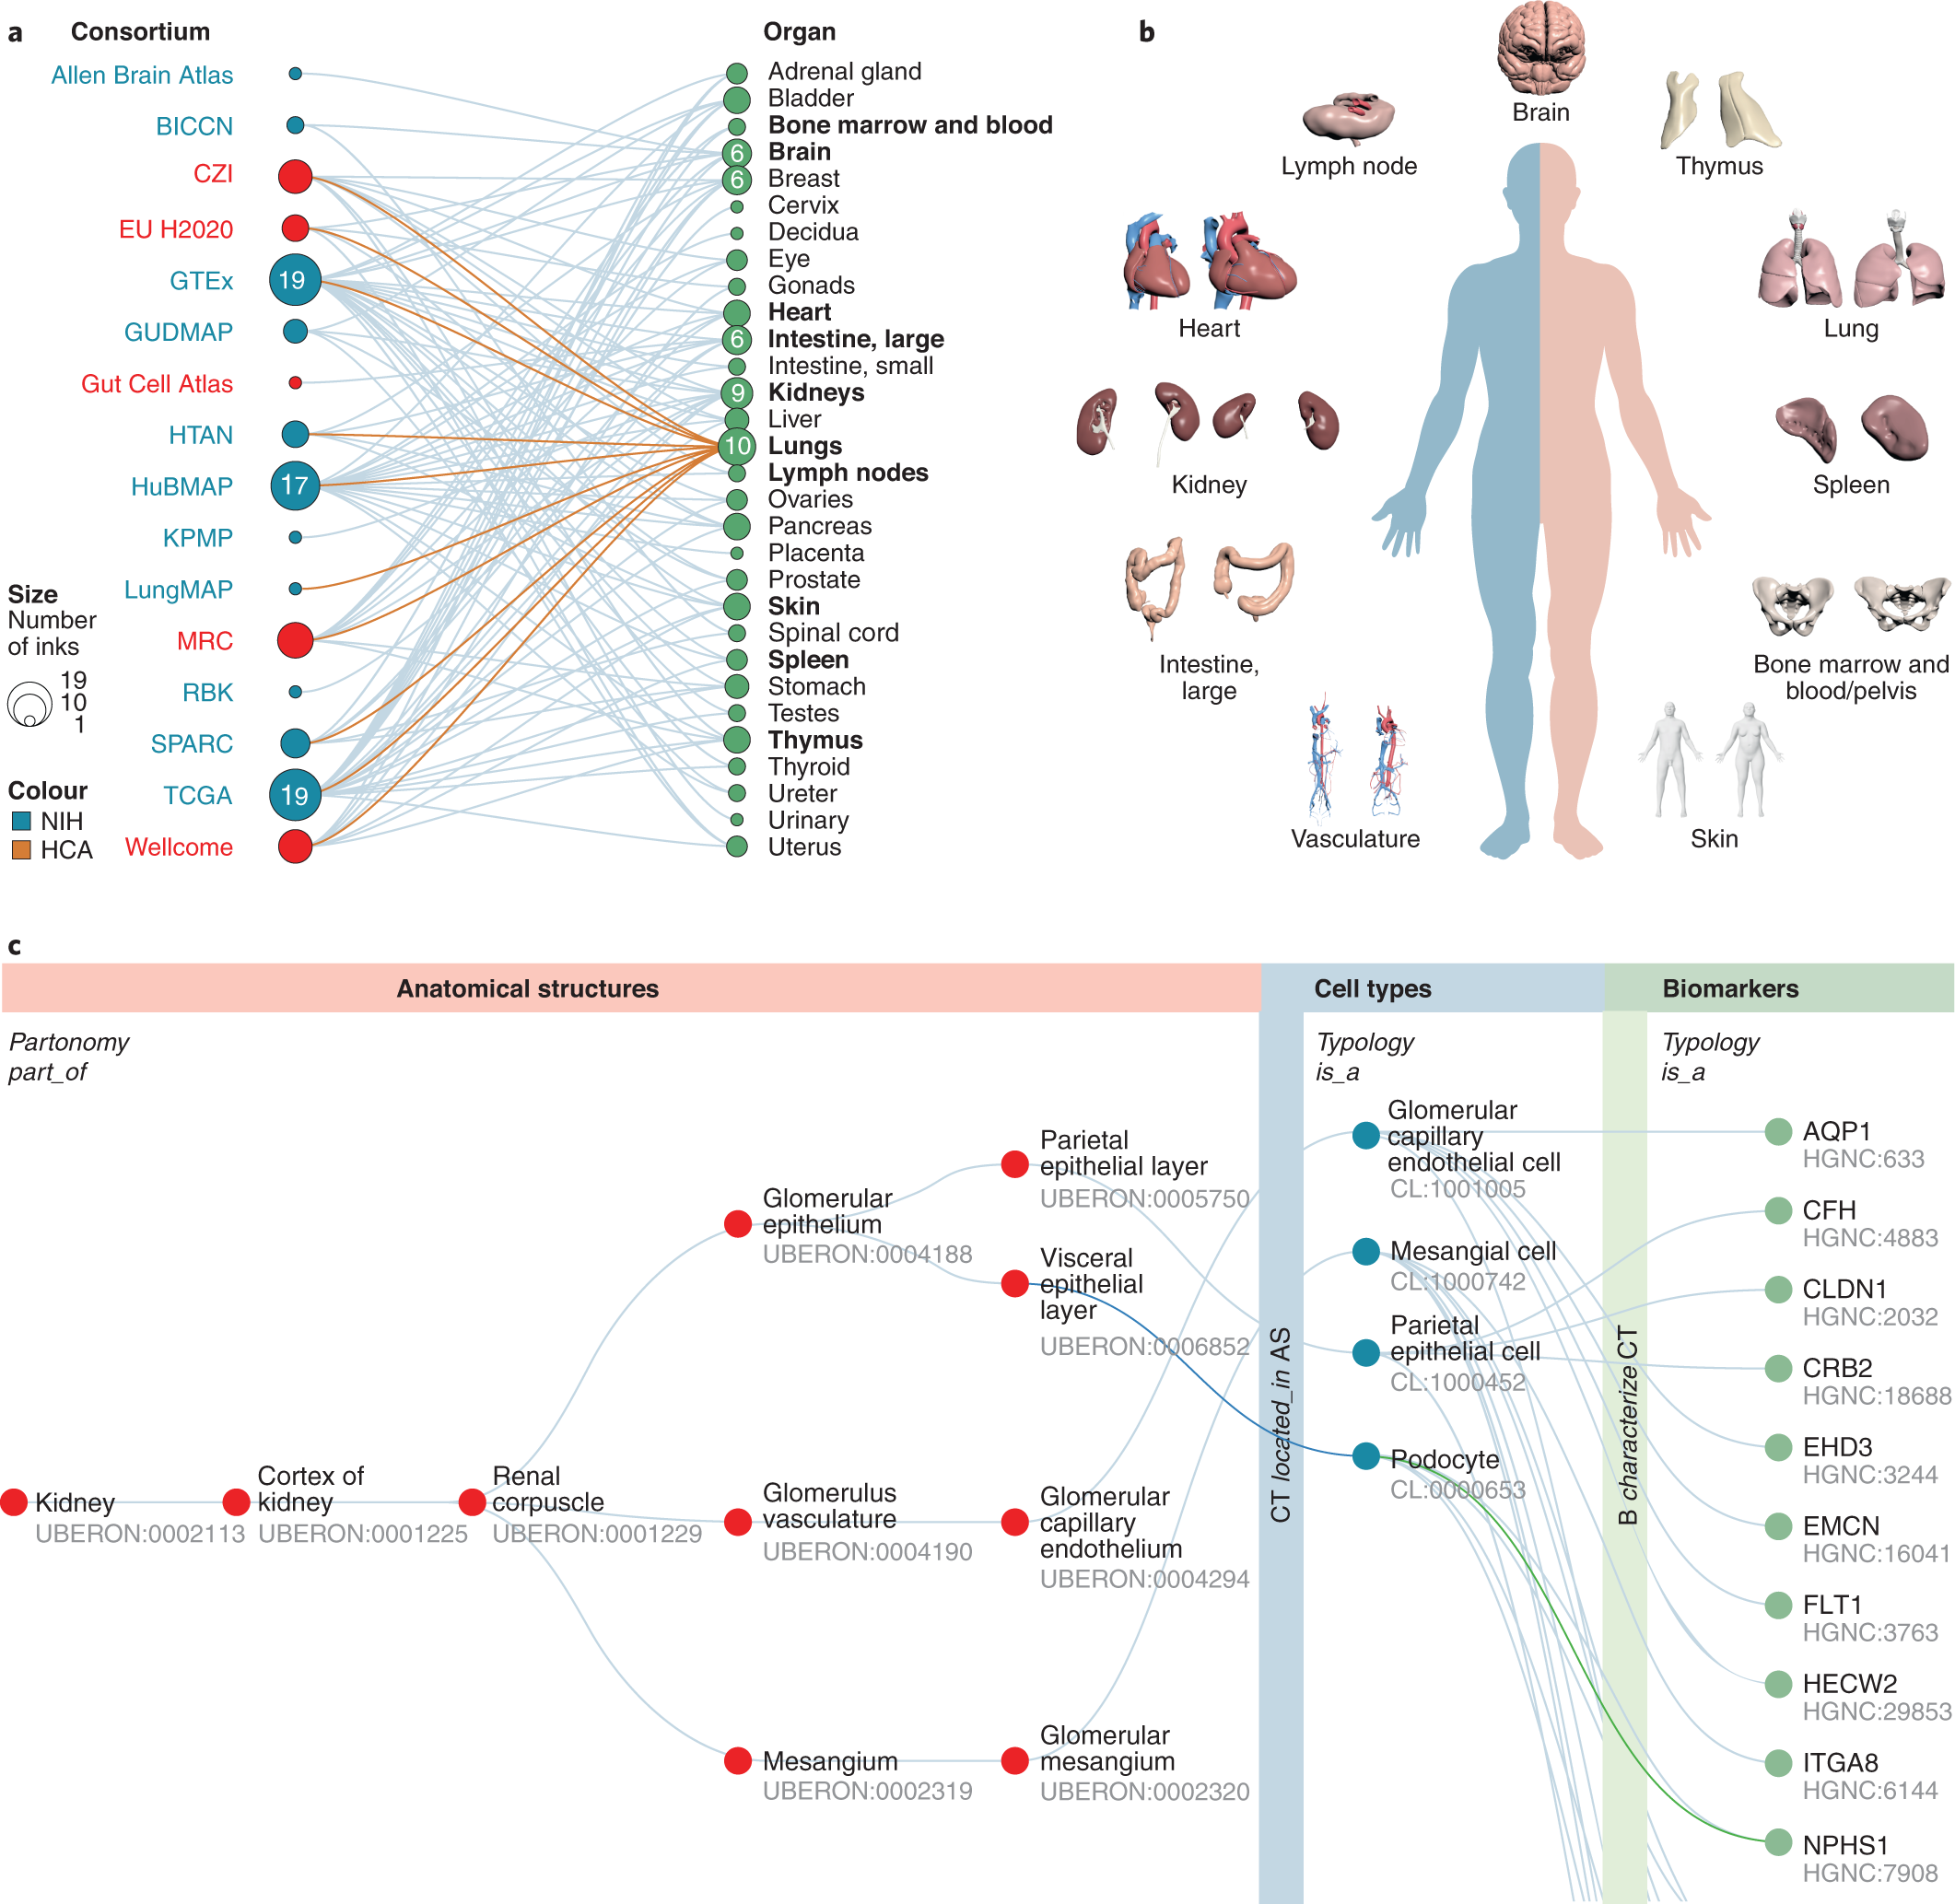 Anatomical structures, cell types and biomarkers of the Human Reference  Atlas | Nature Cell Biology